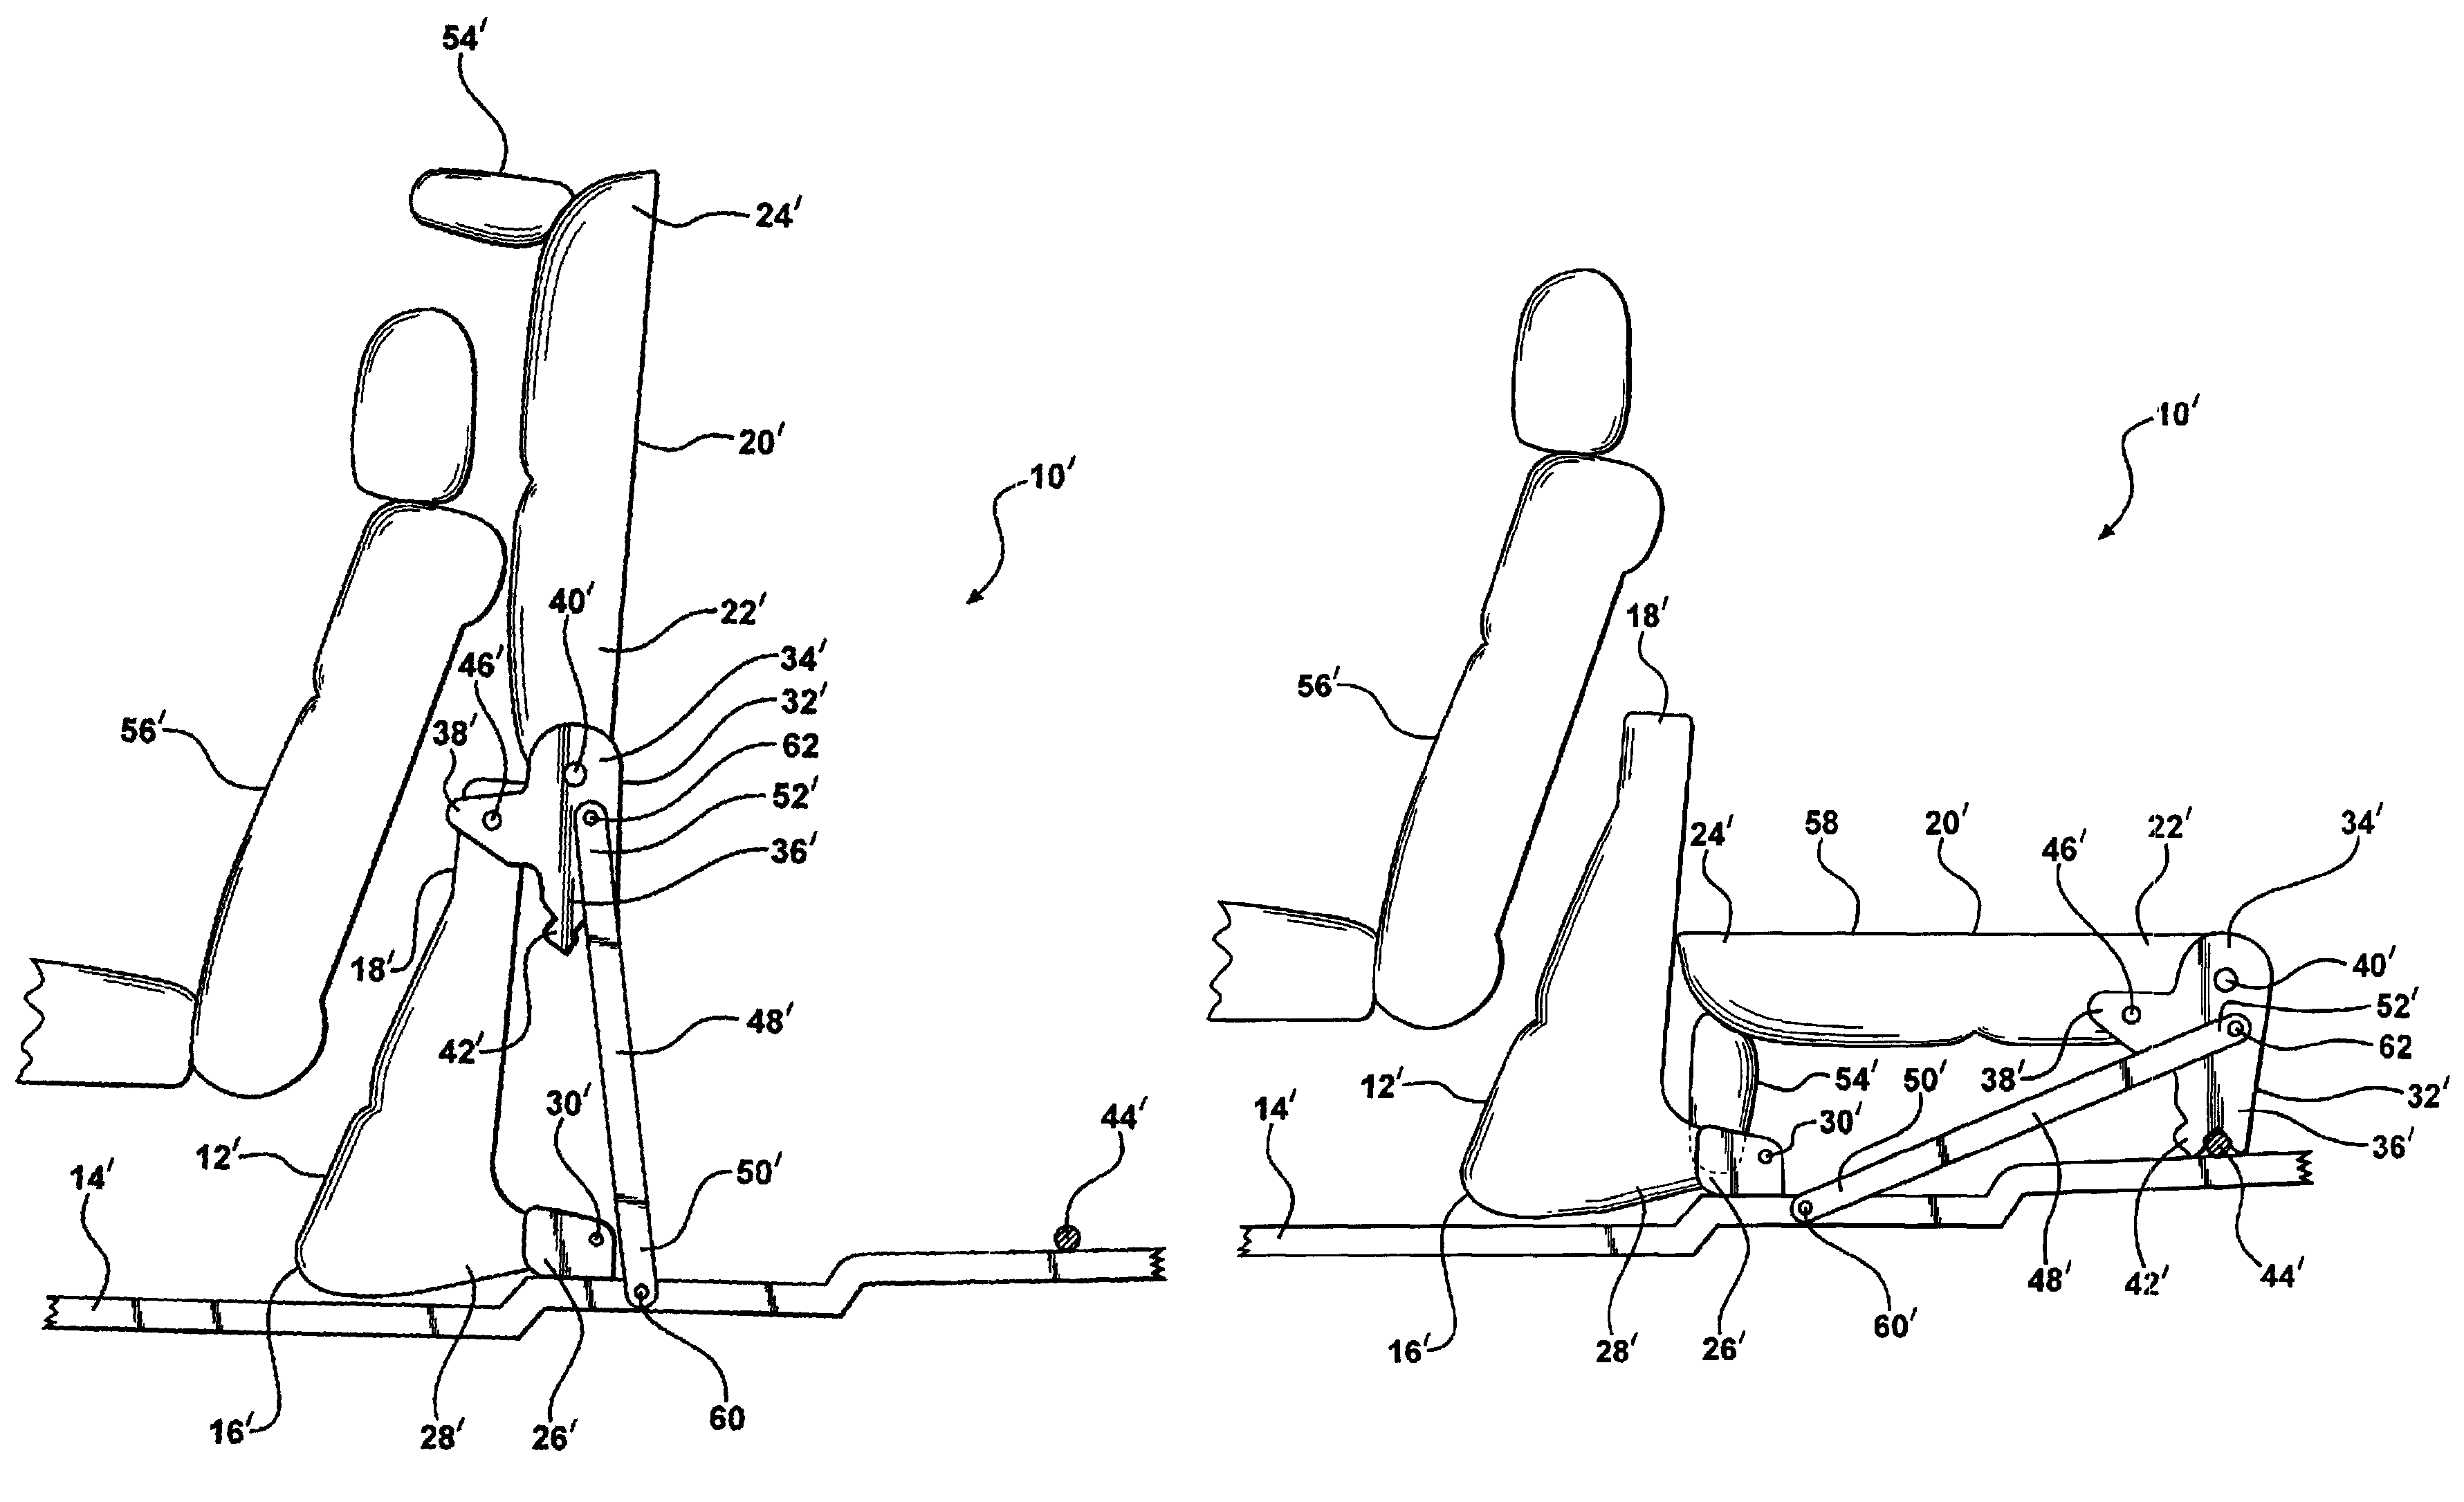 Stand up seat assembly with retractable rear leg